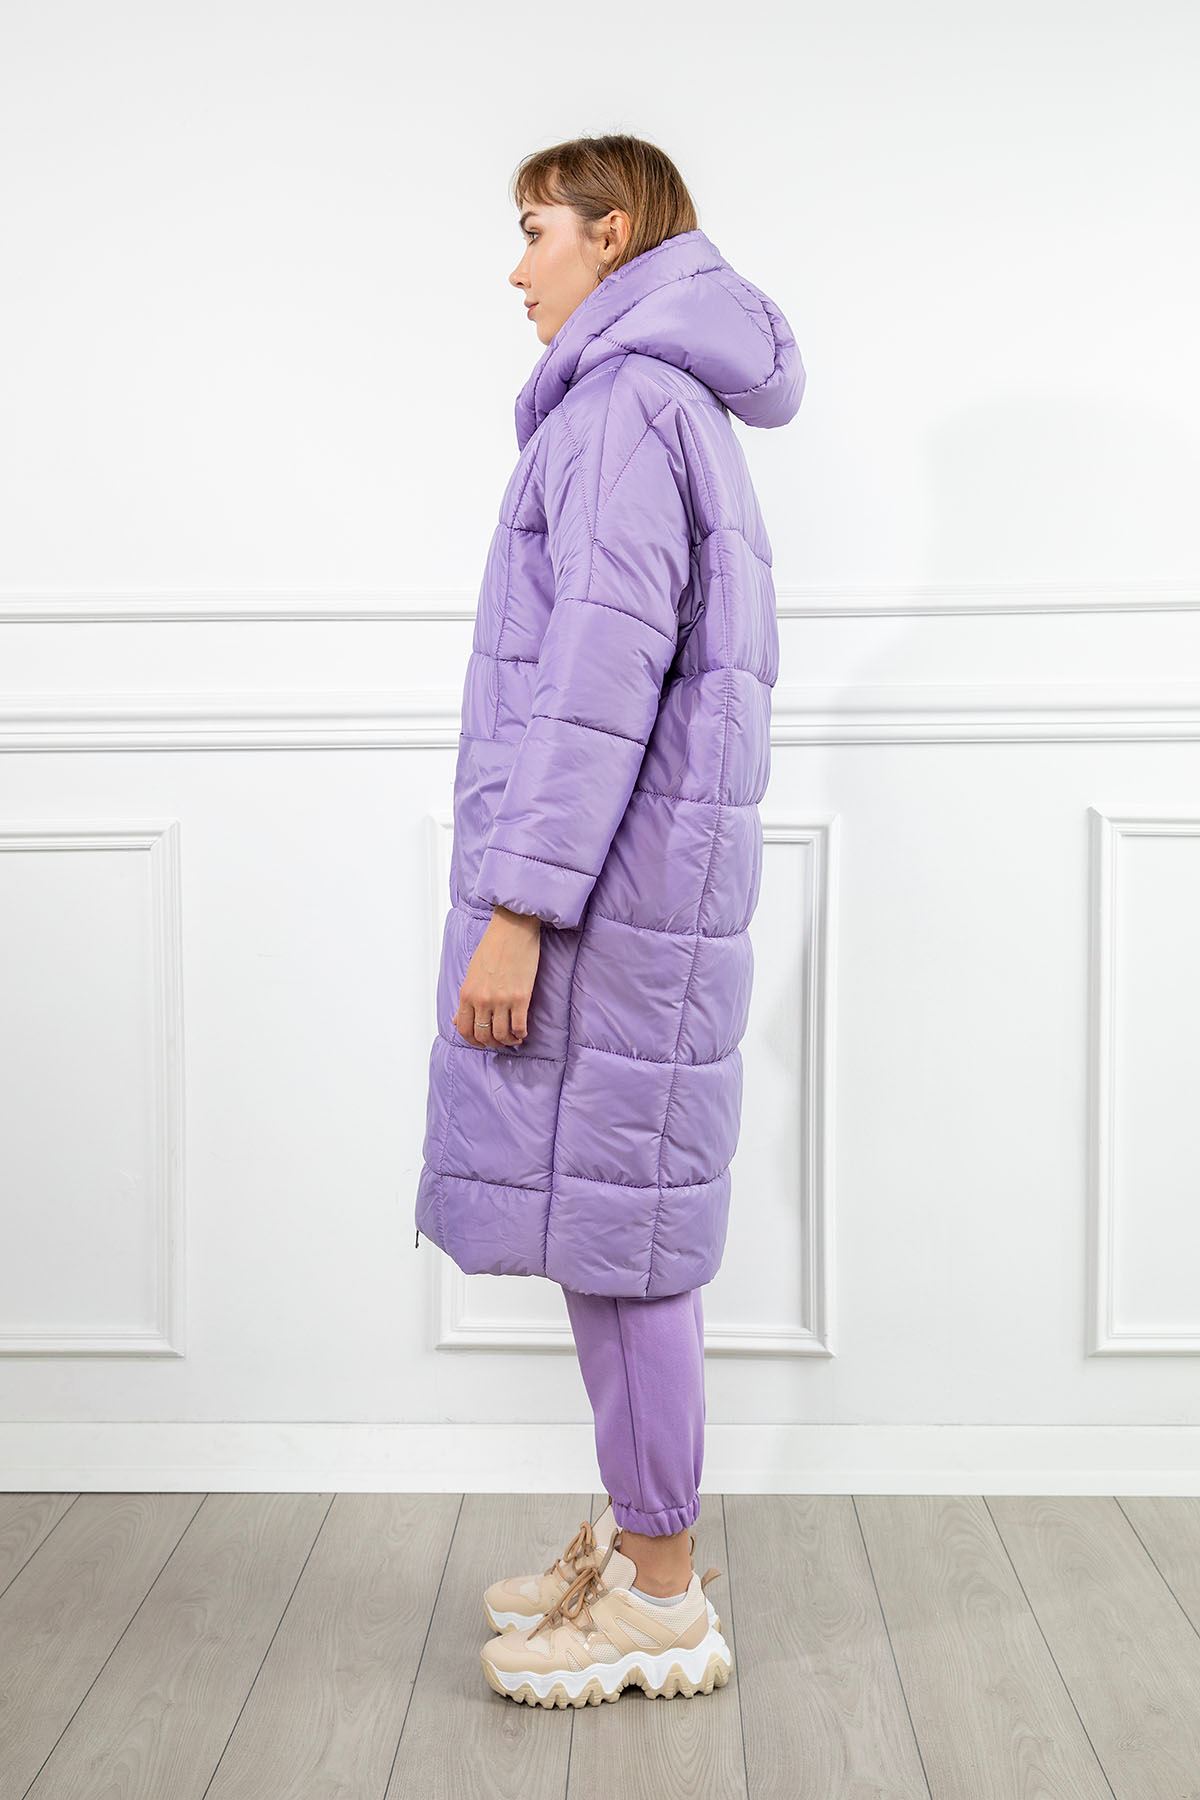 Quilted Fabric Long Sleeve Hooded Below The Knees Boyfriend Women Coat - Lilac